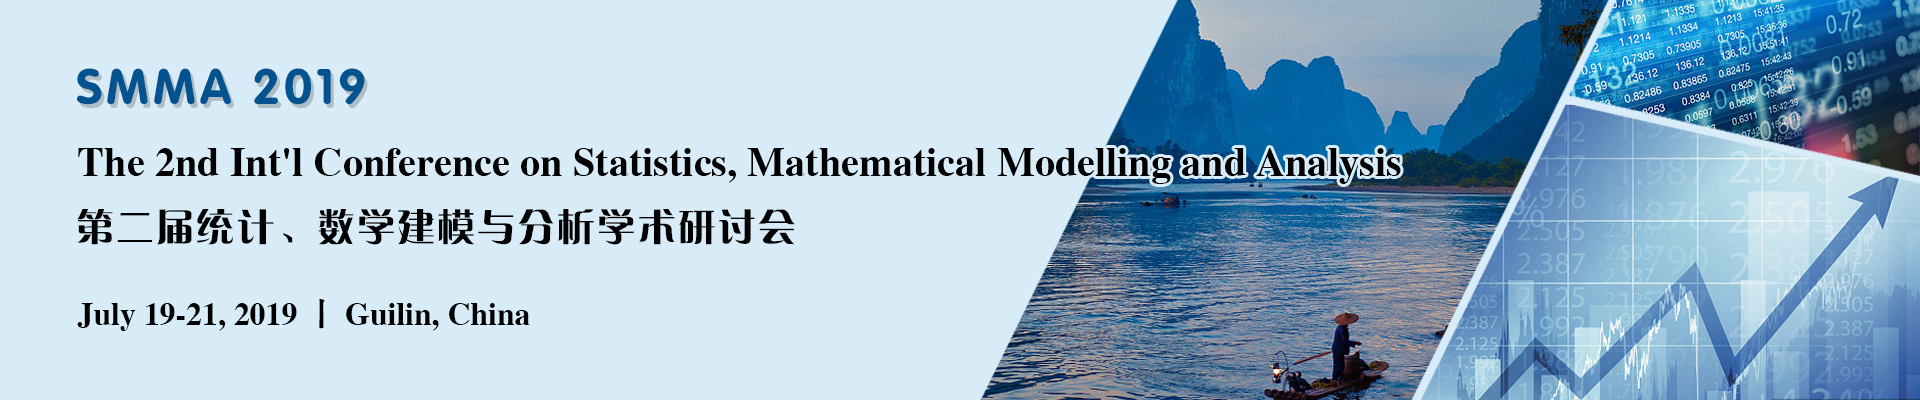 The 2nd Int'l Conference on Statistics, Mathematical Modelling and Analysis (SMMA 2019), Guilin, Guangxi, China